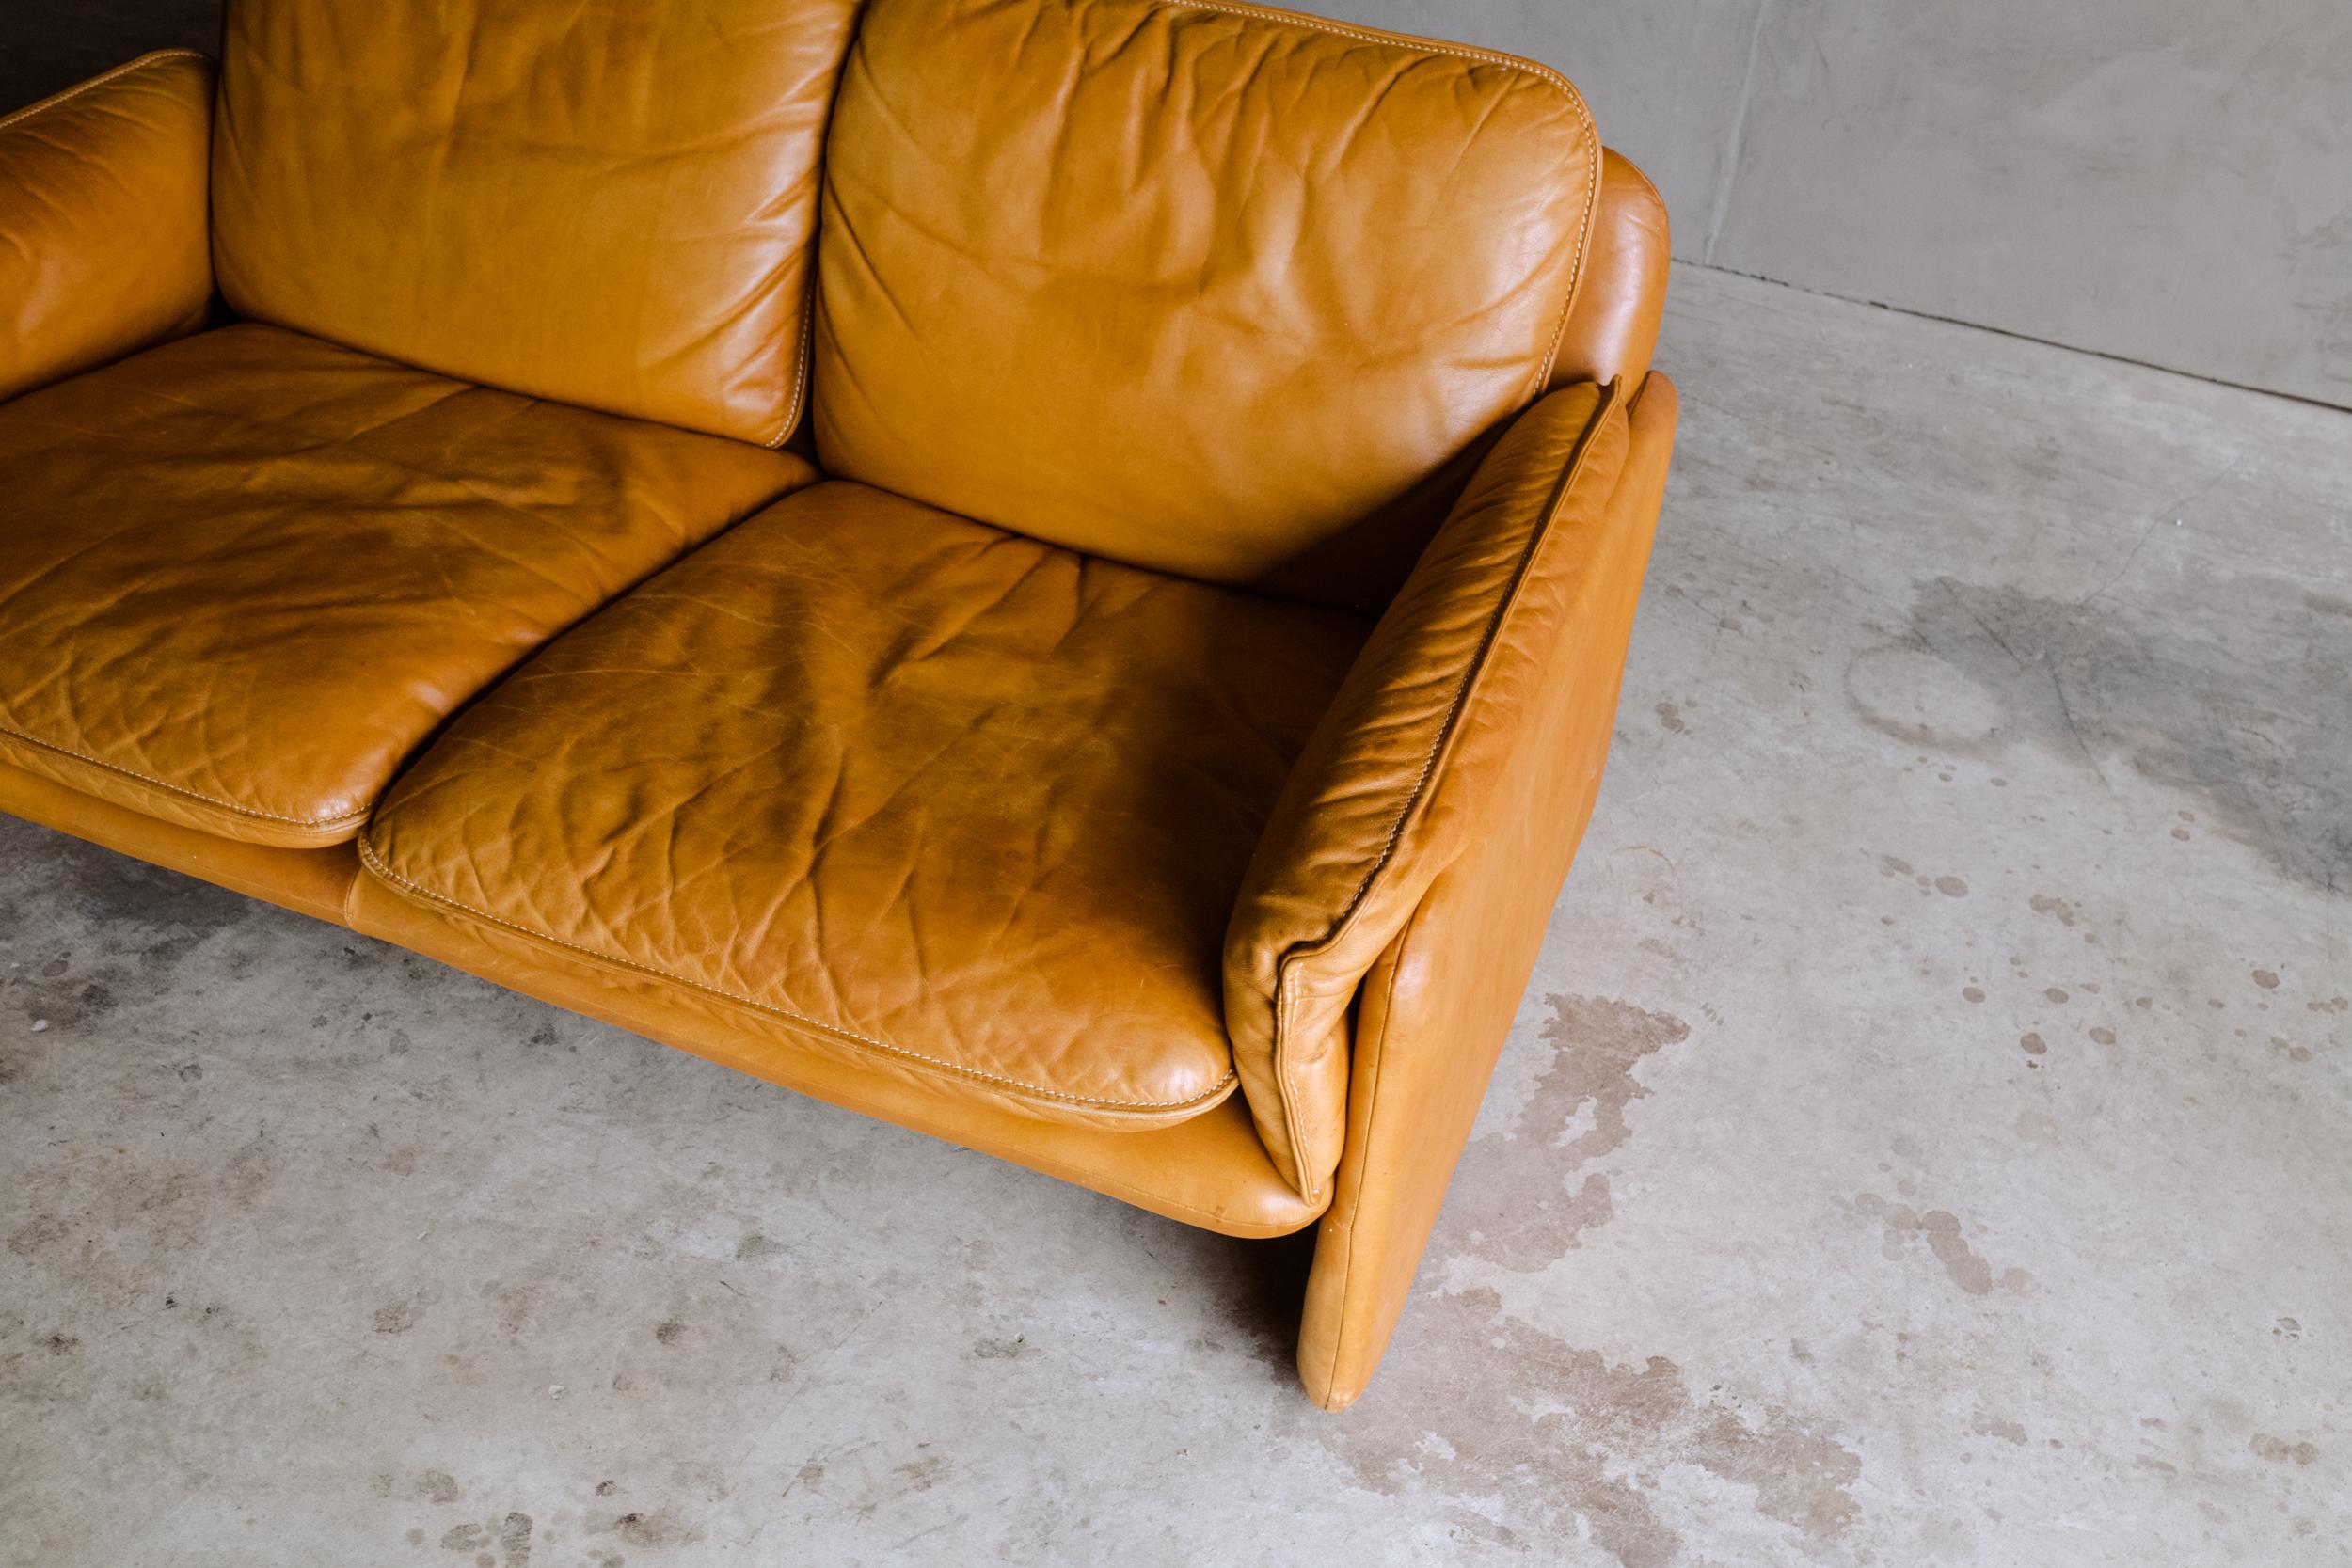 Vintage leather De Sede sofa From Switzerland, Circa 1970. Original cognac leather upholstery with fantastic color and patina.